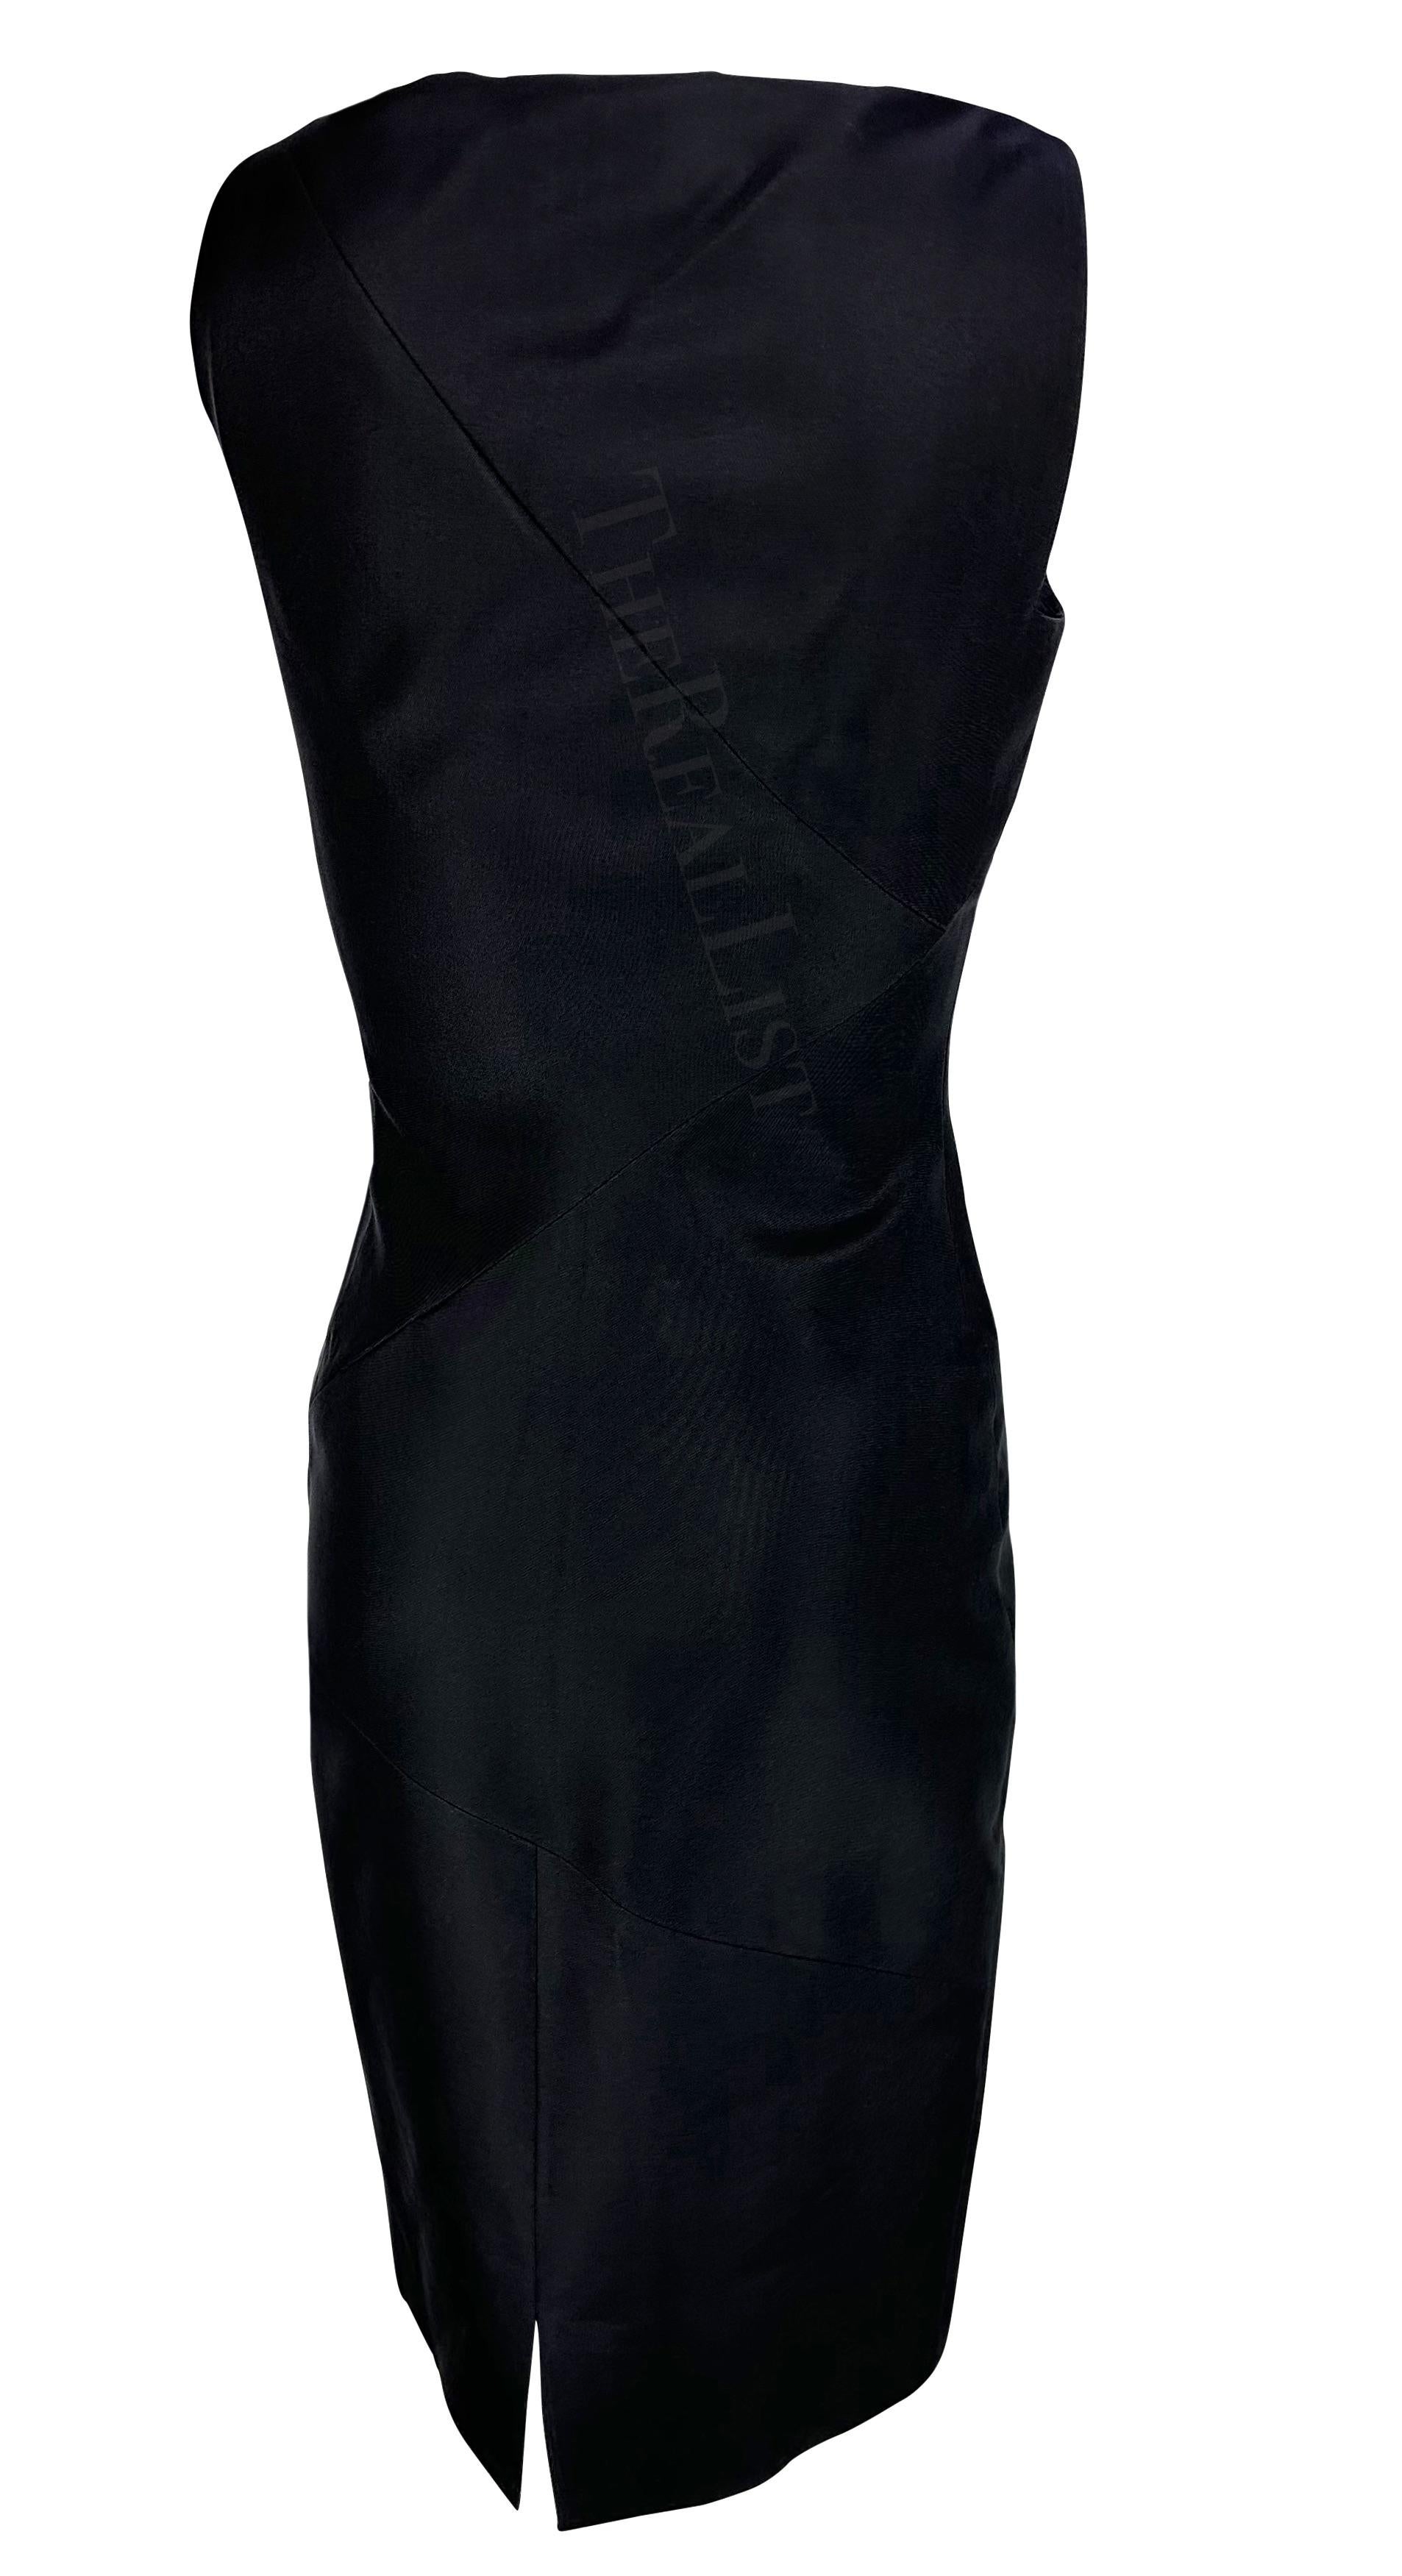 S/S 1998 Gucci by Tom Ford Runway Black Sleeveless Panel Bodycon Bateau Dress For Sale 2